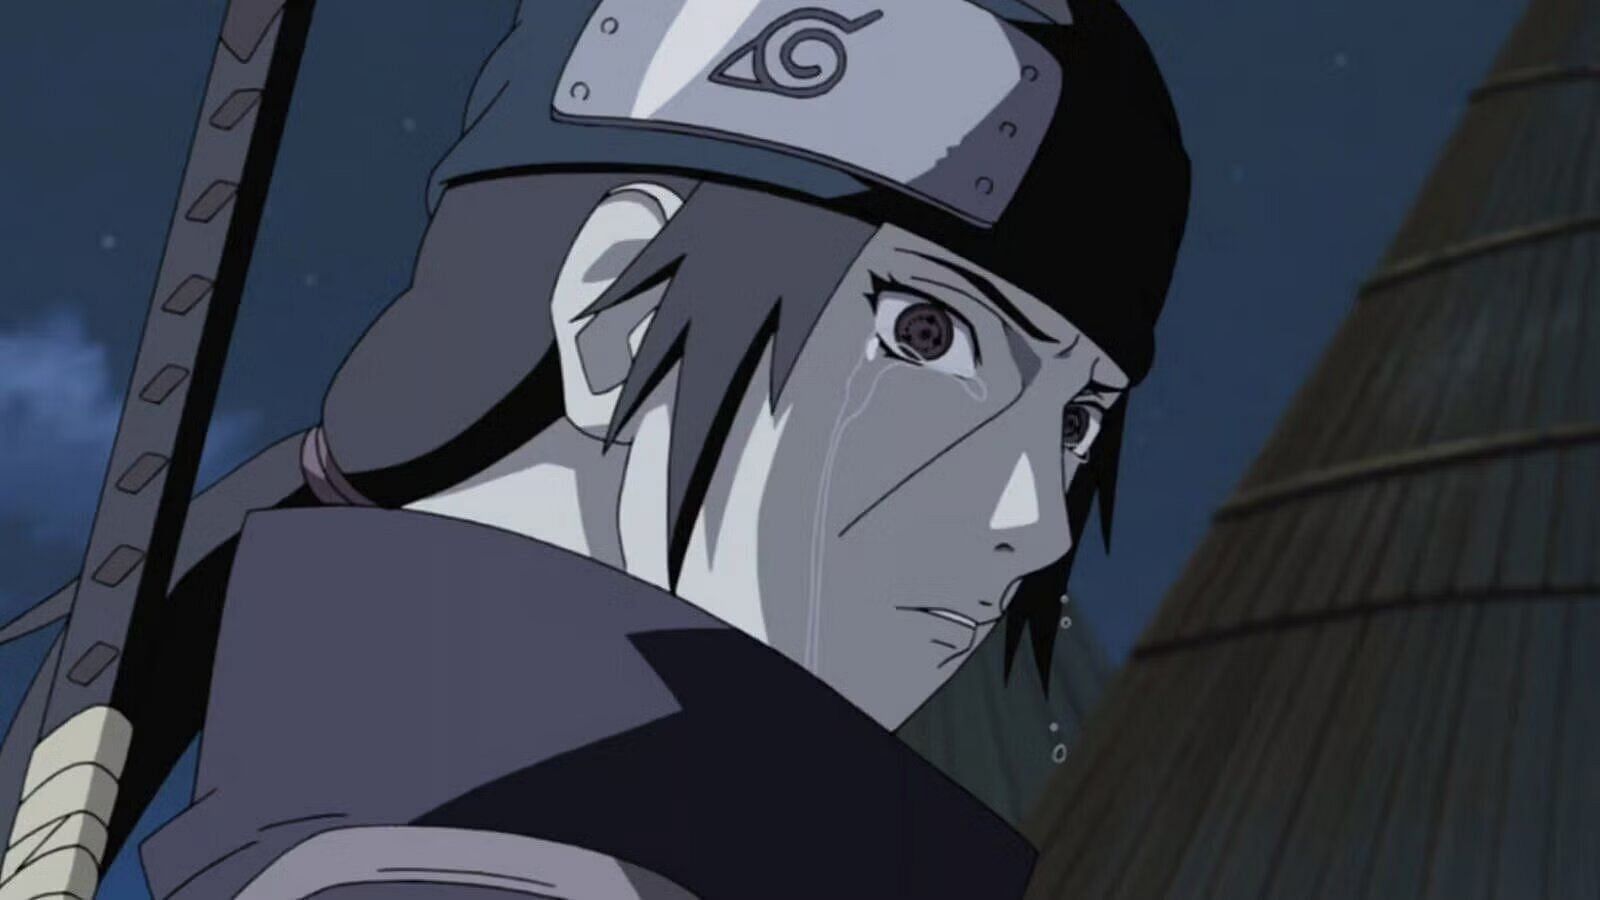 Naruto and the question of whether is Itachi a villain or a hero (Image via Studio Pierrot).